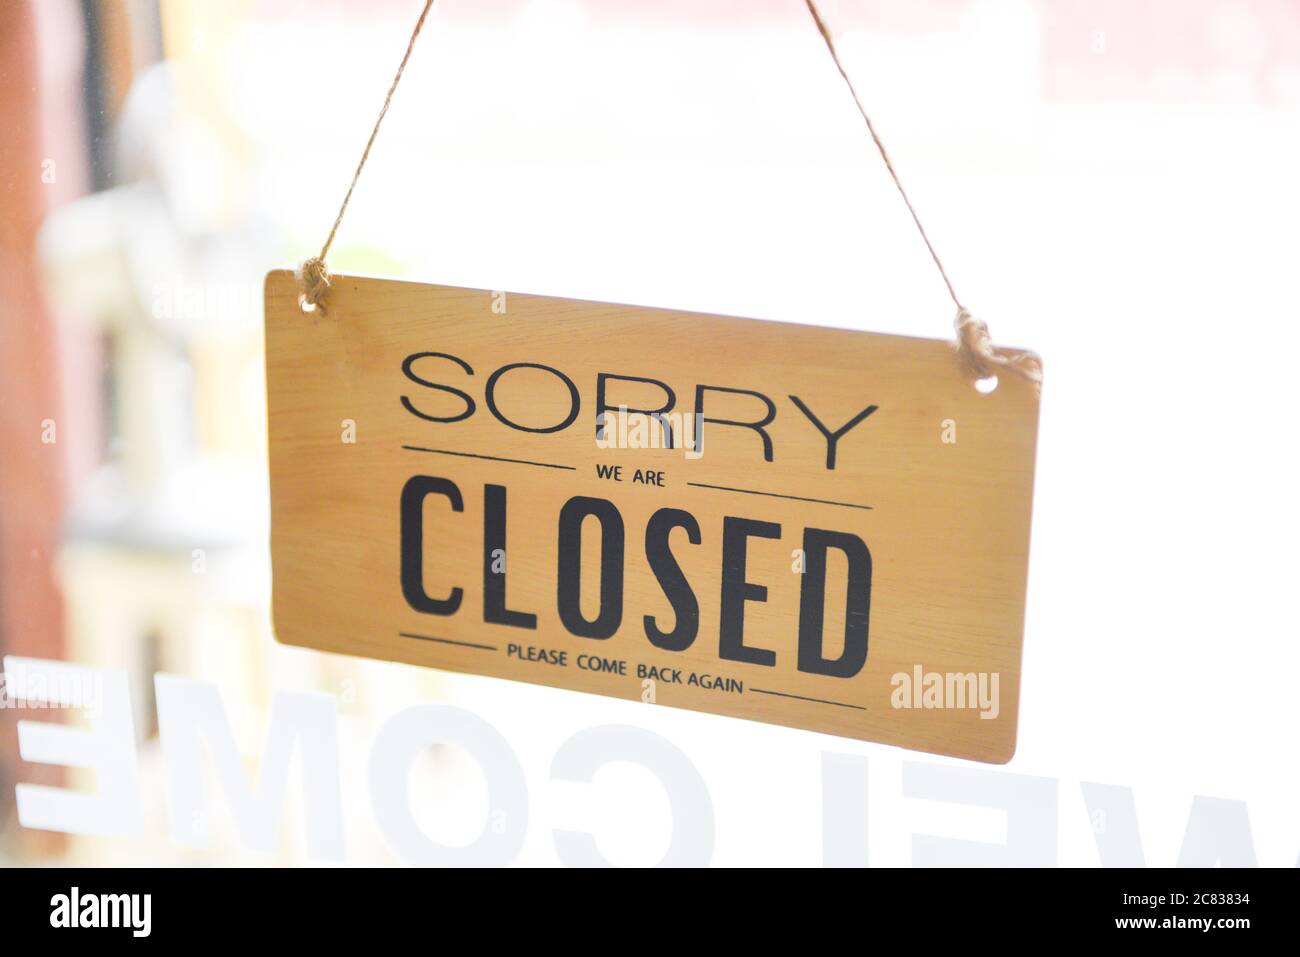 Closed shop sign / Sorry we're closed sign hanging on cafe glass door Stock Photo